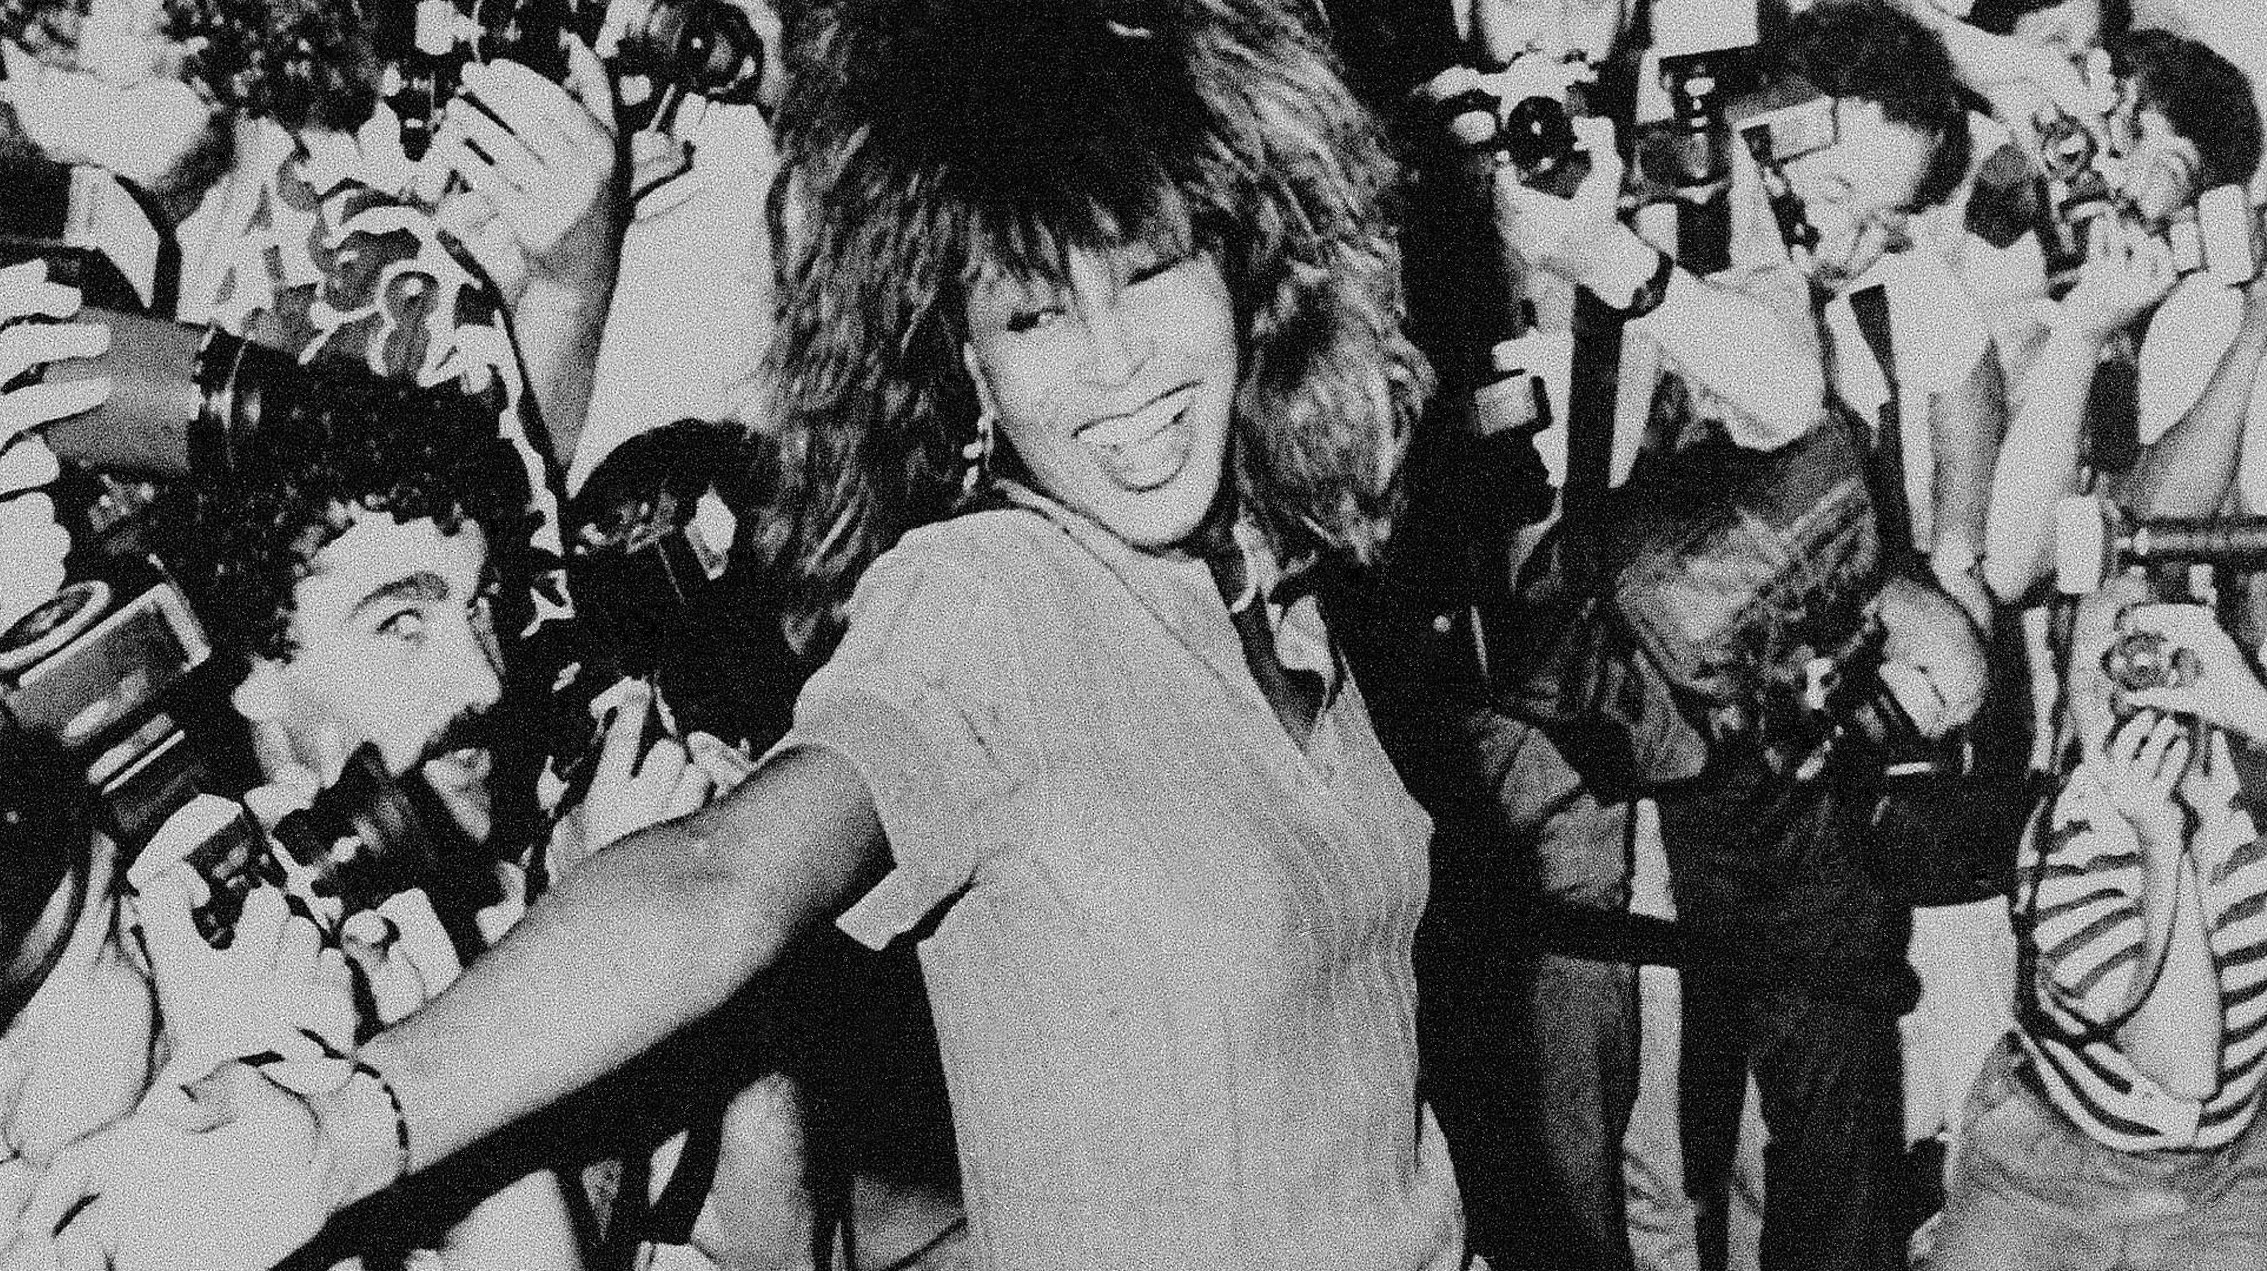 Tina Turner, then 48, is shown dancing a few steps for photographers upon arrival at the Sheraton Hotel in Buenos Aires, Argentina, on January 2, 1988. Turner, who died in May, performed the next day at the River Plate Stadium before 60,000 fans. Photo credit: Alejandro Querol, The Associated Press